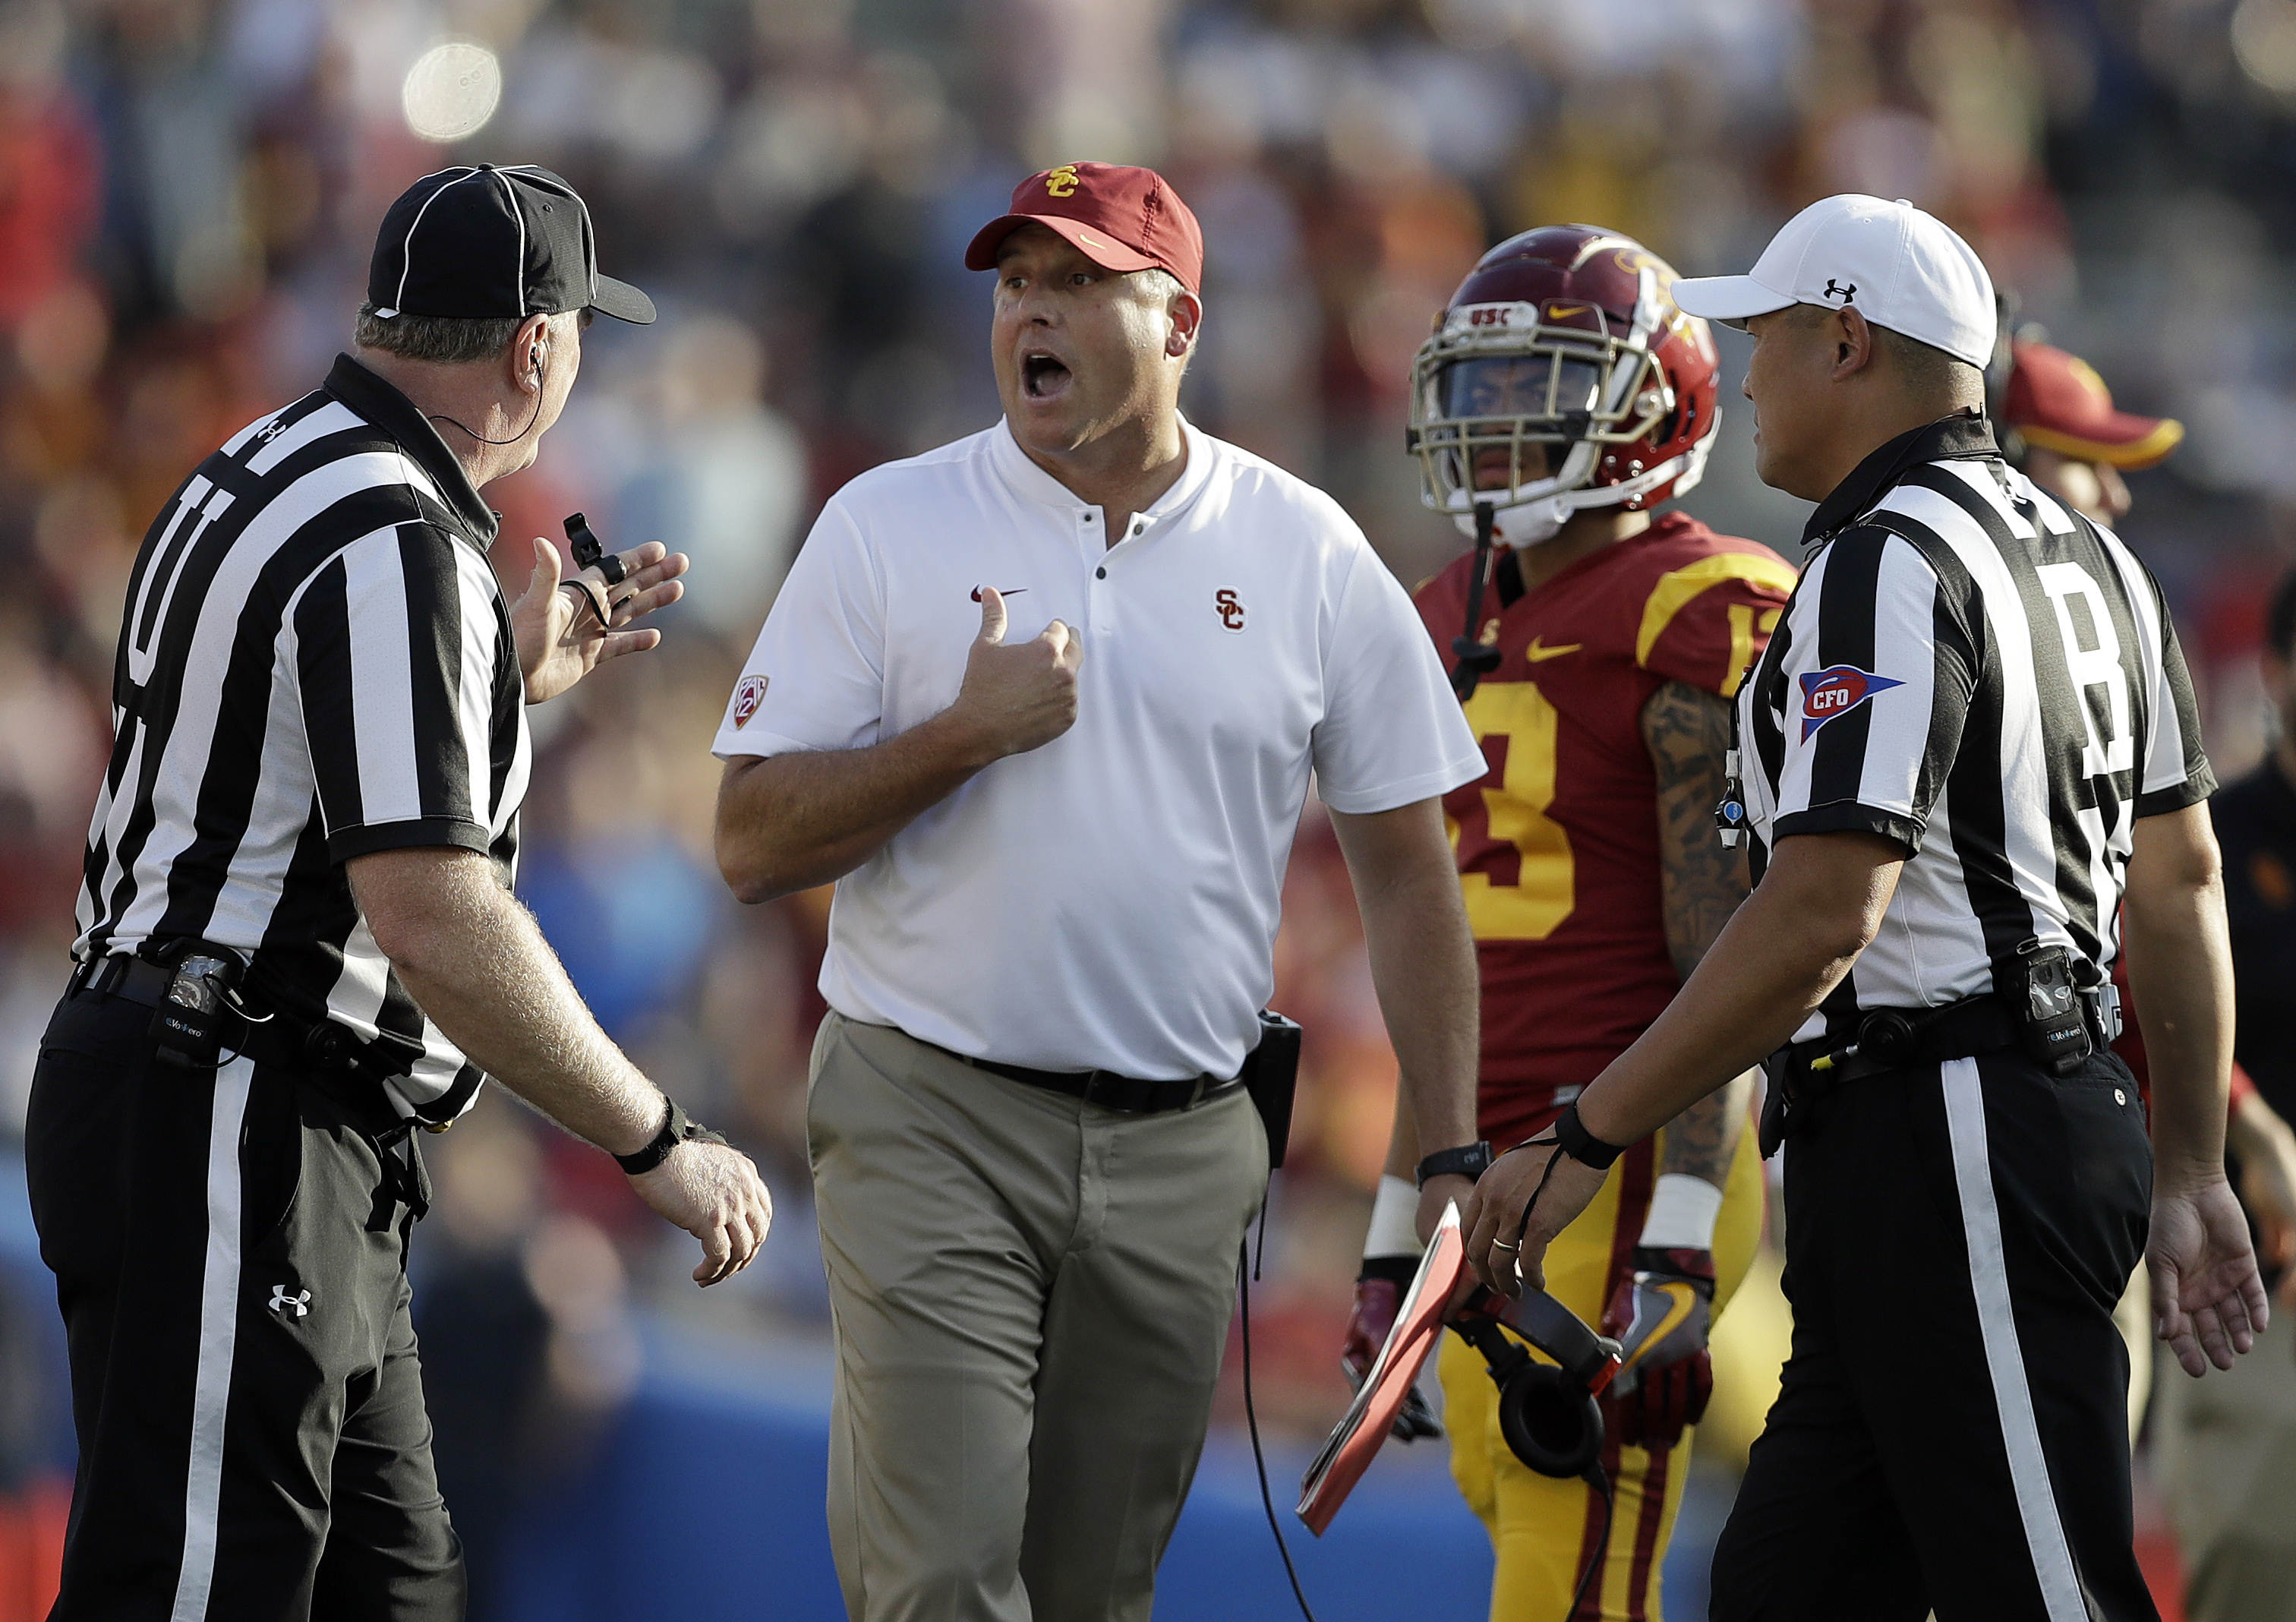 USC's Clay Helton doesn't expect to lose job after UCLA loss